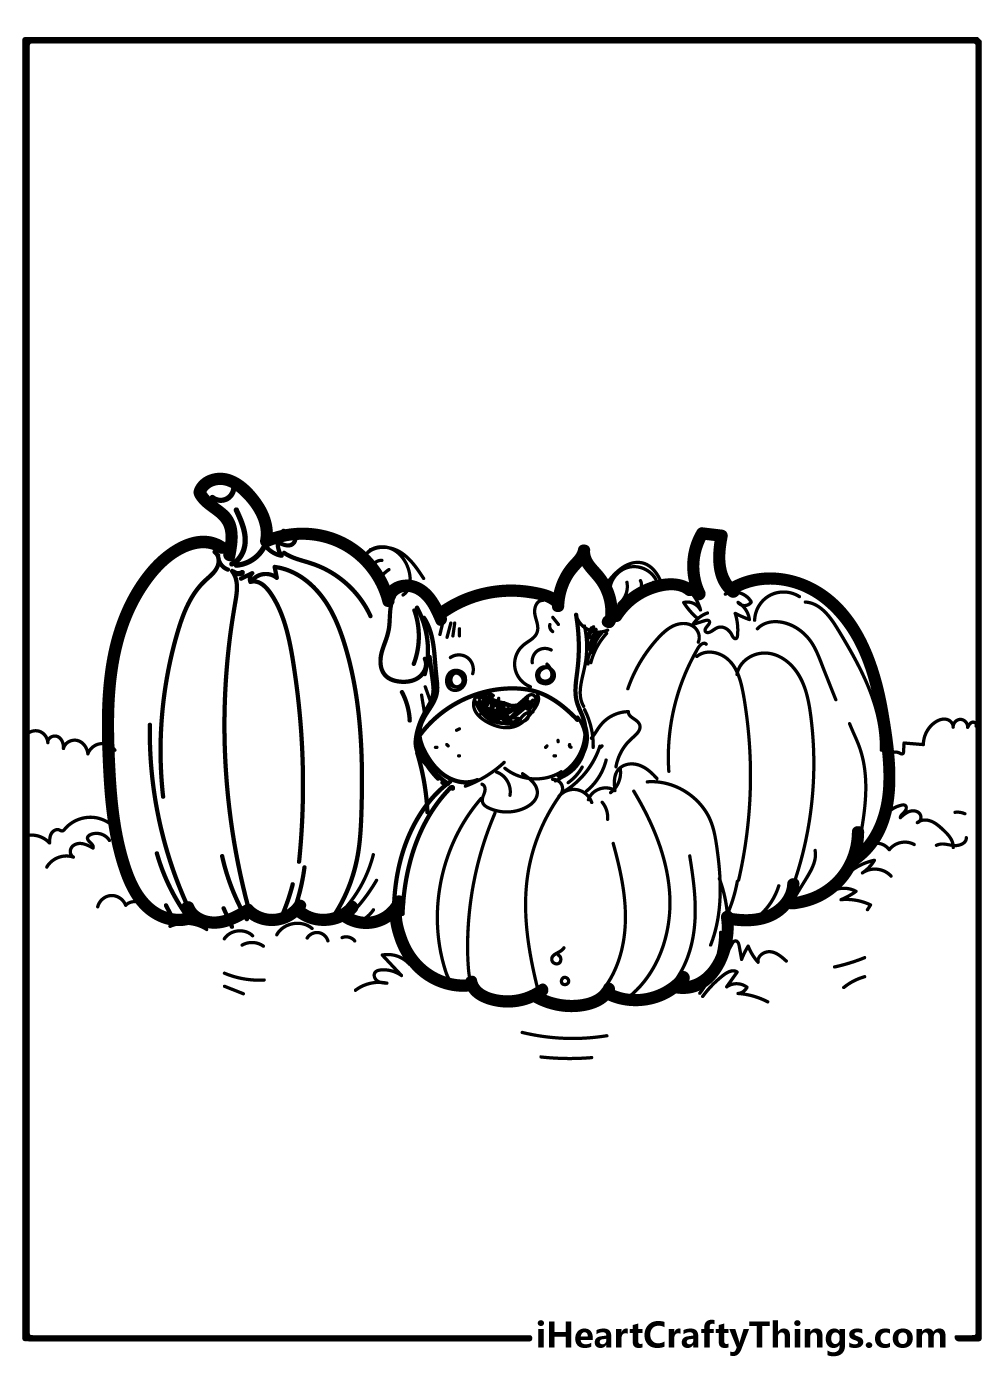 Pumpkin Coloring Pages for kids free download